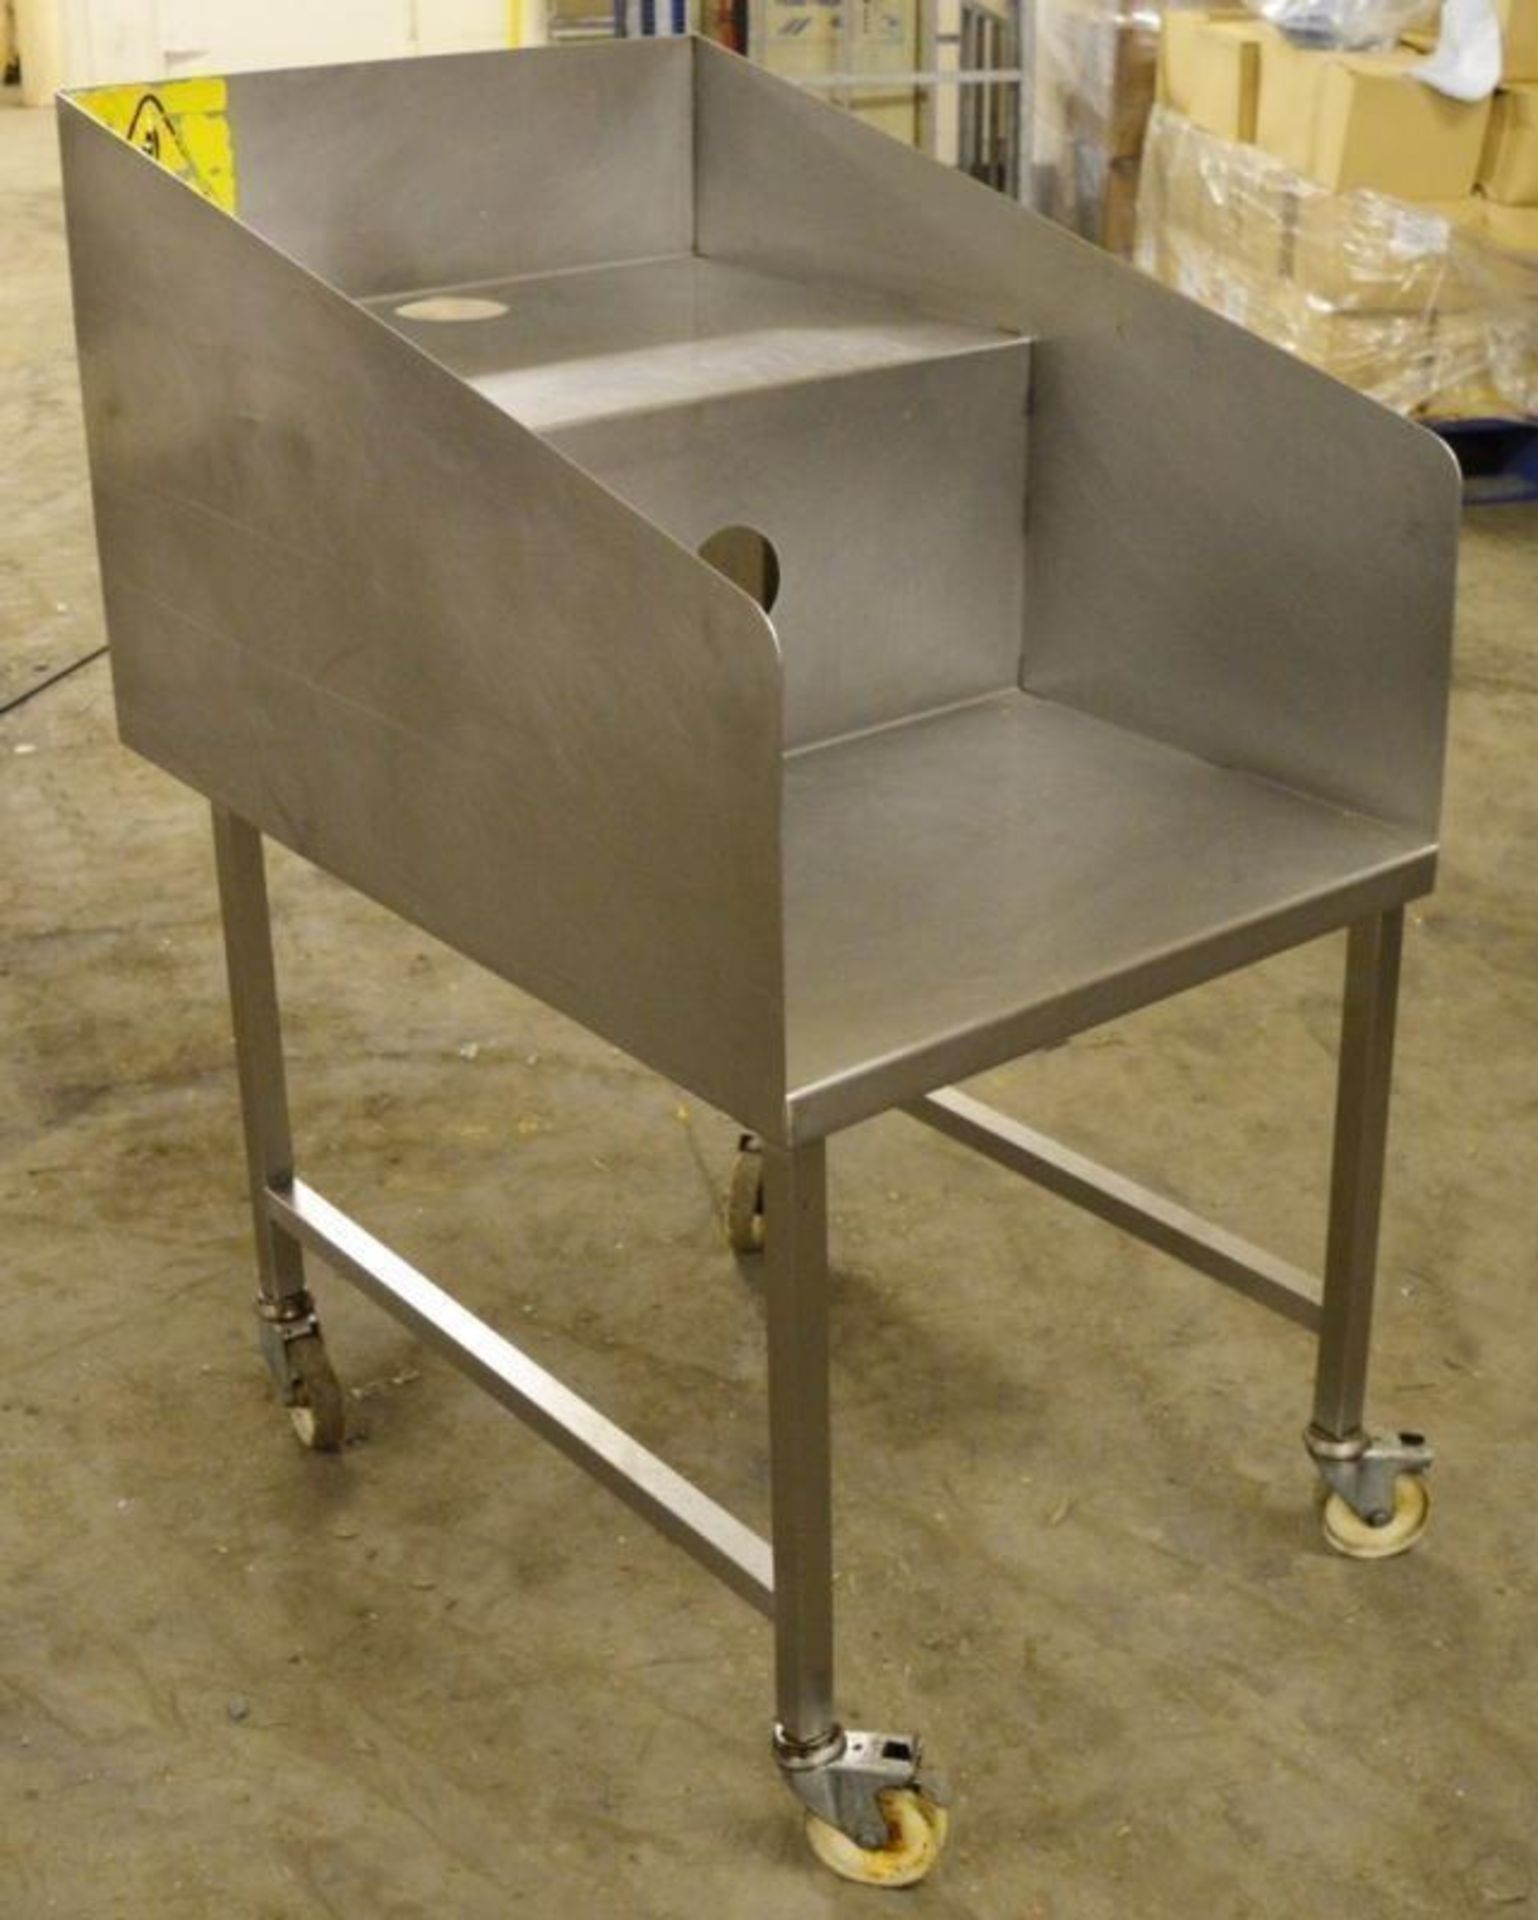 1 x Stainless Steel Commercial Waste Bench - Two Tier Waste Chute on Castors - H114 x W62.5 x D90 cm - Bild 4 aus 5